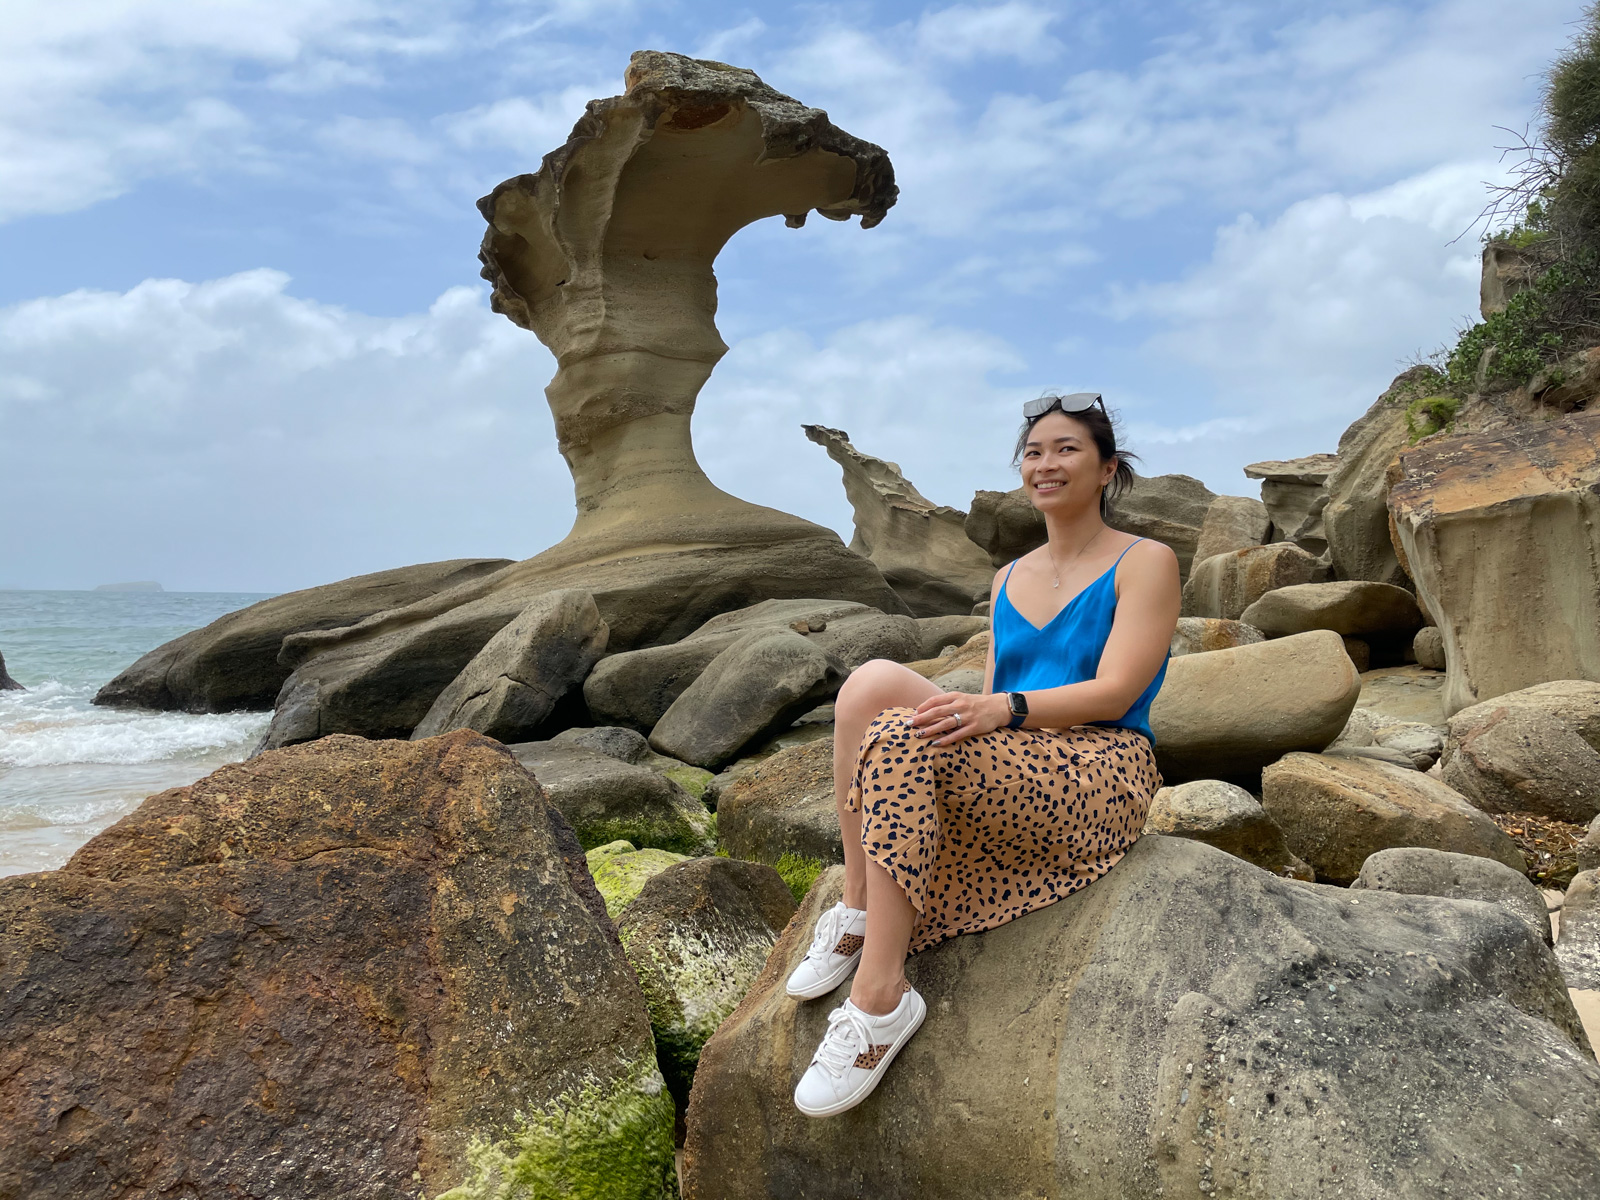 A woman with dark hair, wearing a blue top and a long cheetah print skirt with white sneakers, sitting on a rock by the beach. Behind her is a giant rock formation like a wave. The sky is cloudy